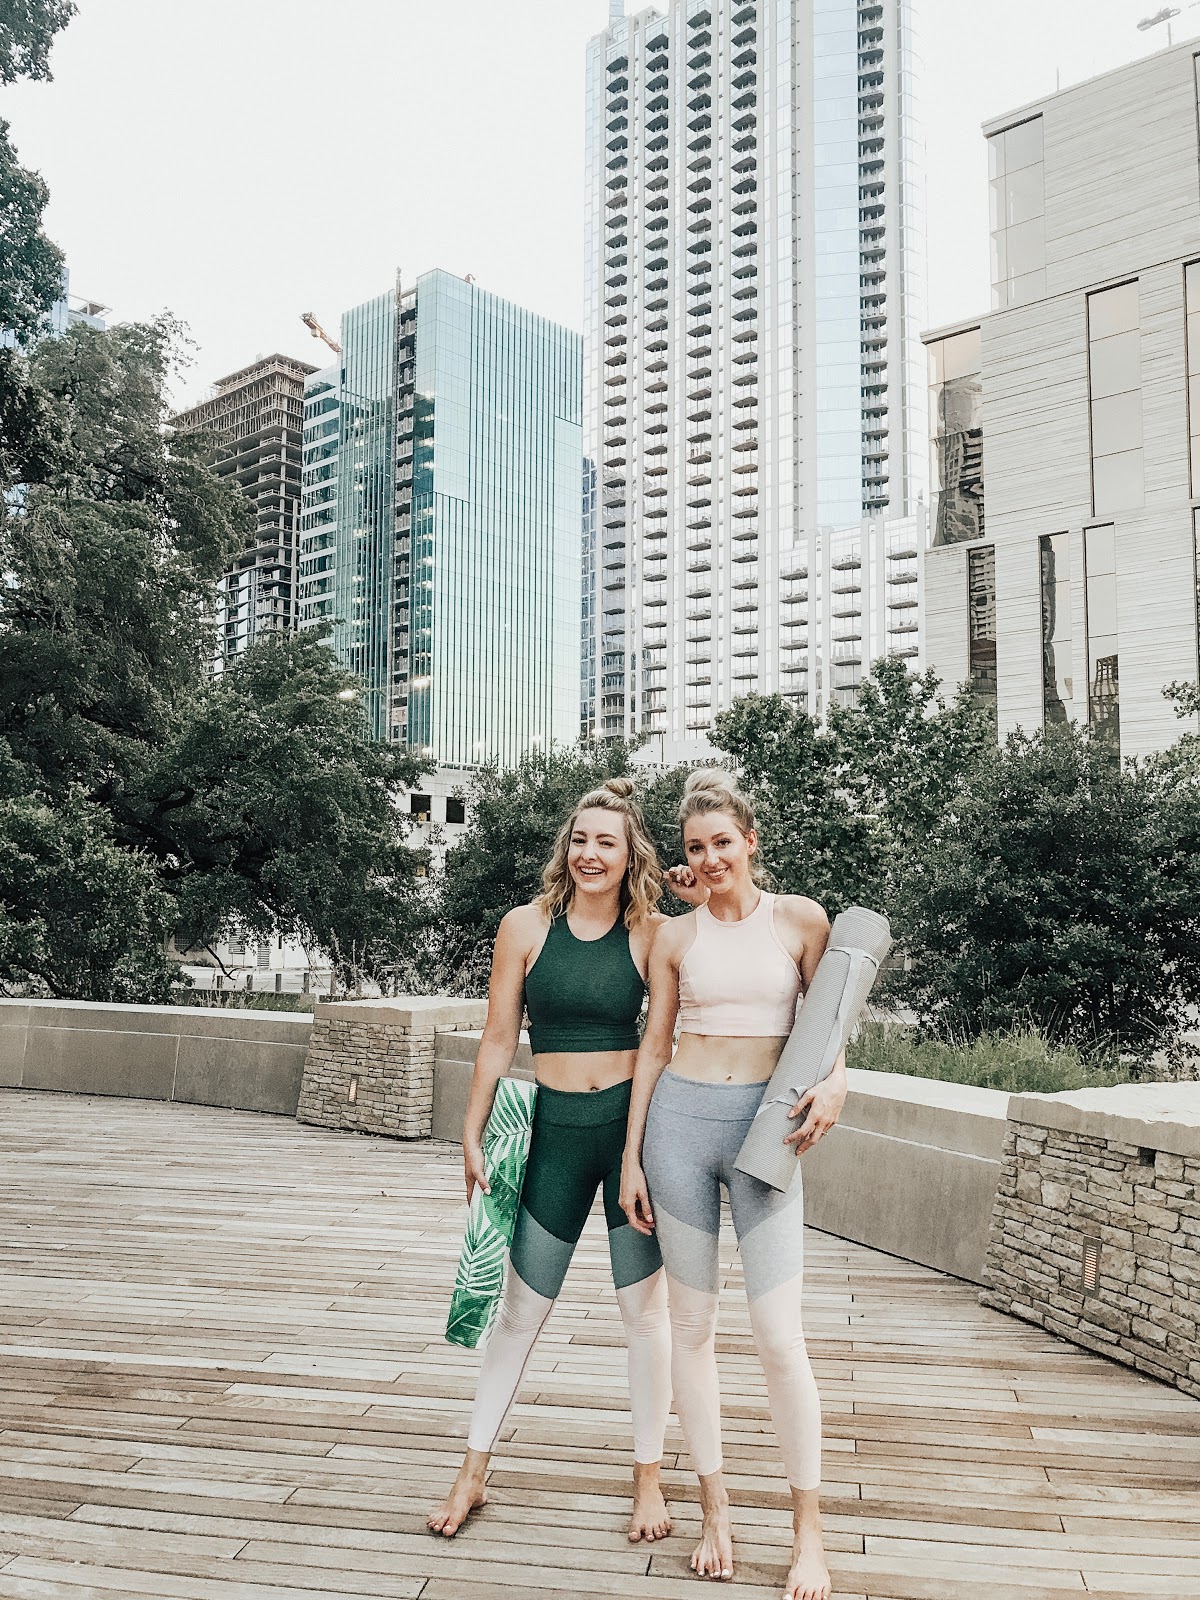 Outdoor Voices yoga outfits